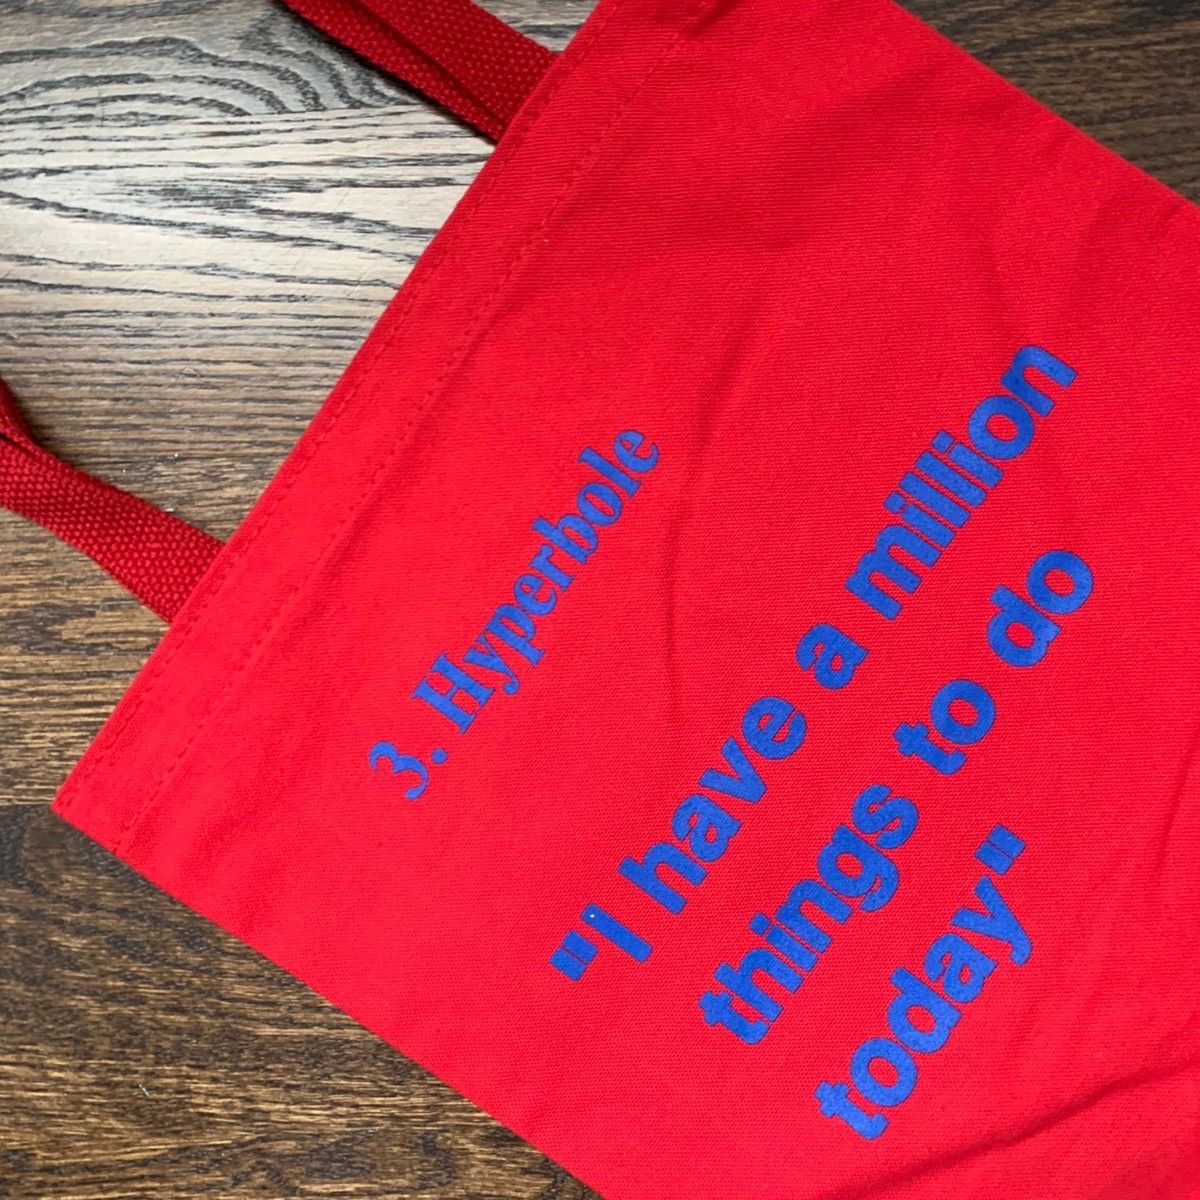 Virgil Abloh Virgil Abloh x MCA Chicago Hyperbole Quote Tote Bag in Red Size ONE SIZE - 1 Preview